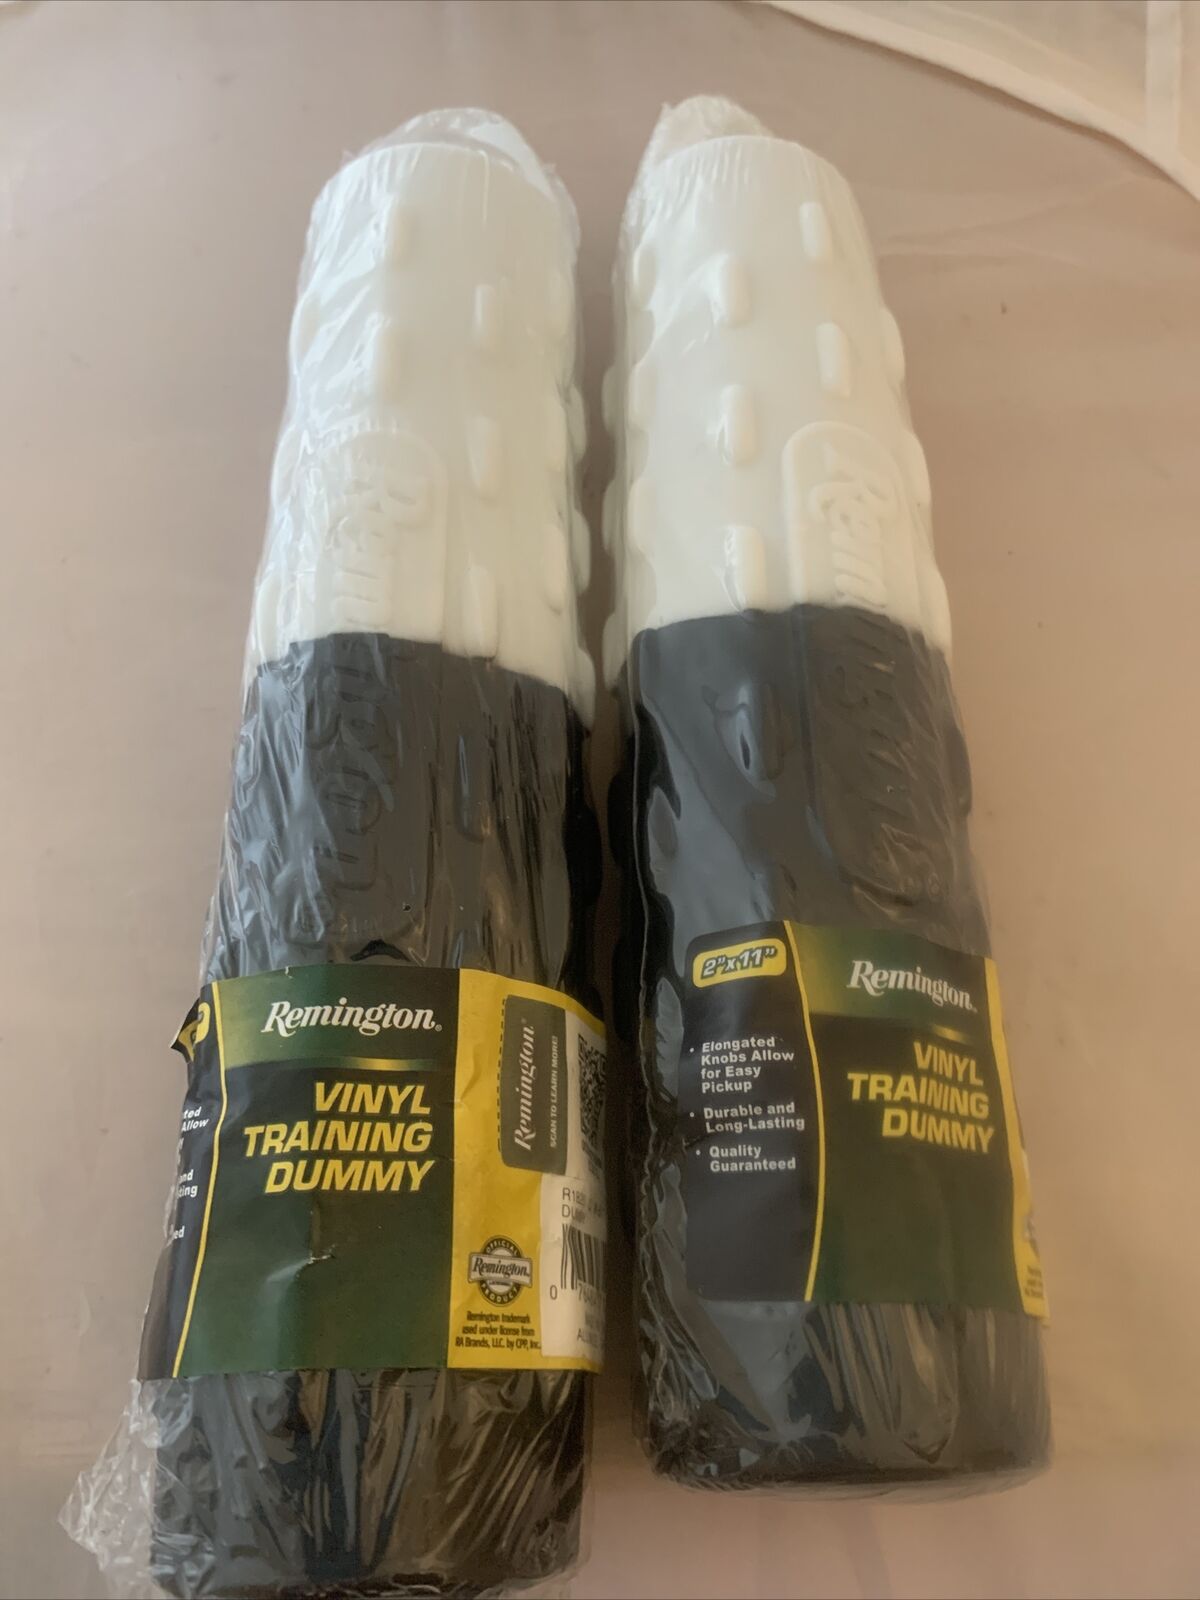 Lot Of (2) Remington Vinyl Training Dummy #1820: 2" X 11" New In Package